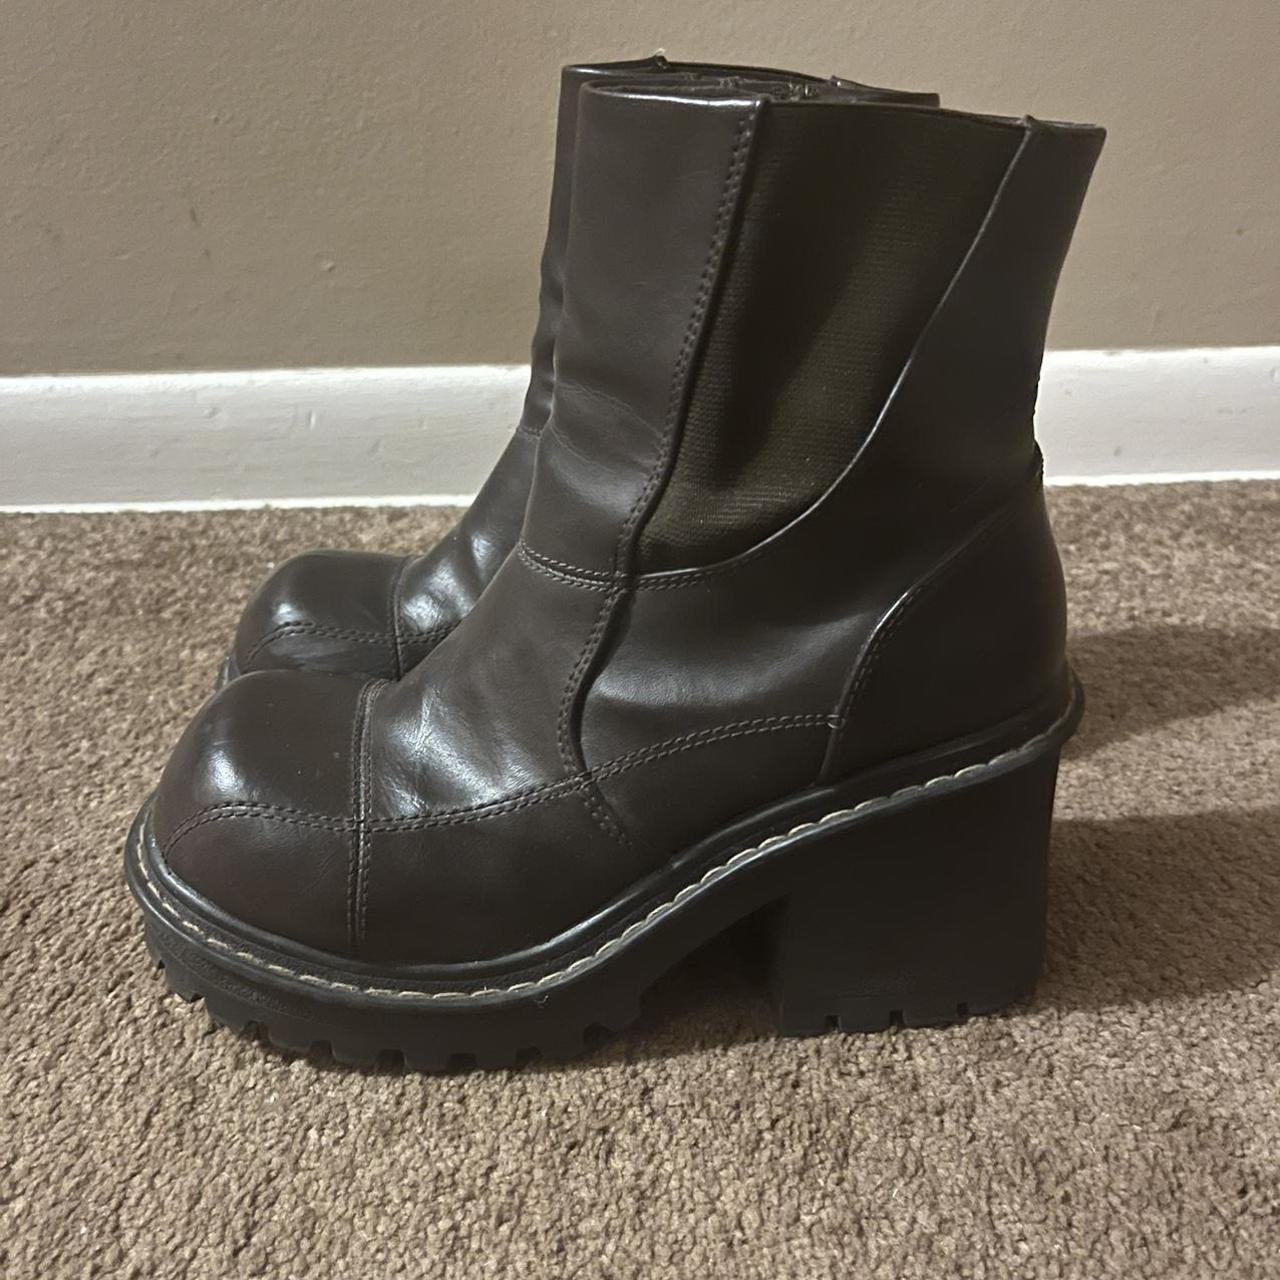 Chunky platform Lower East Side boots. I absolutely... - Depop